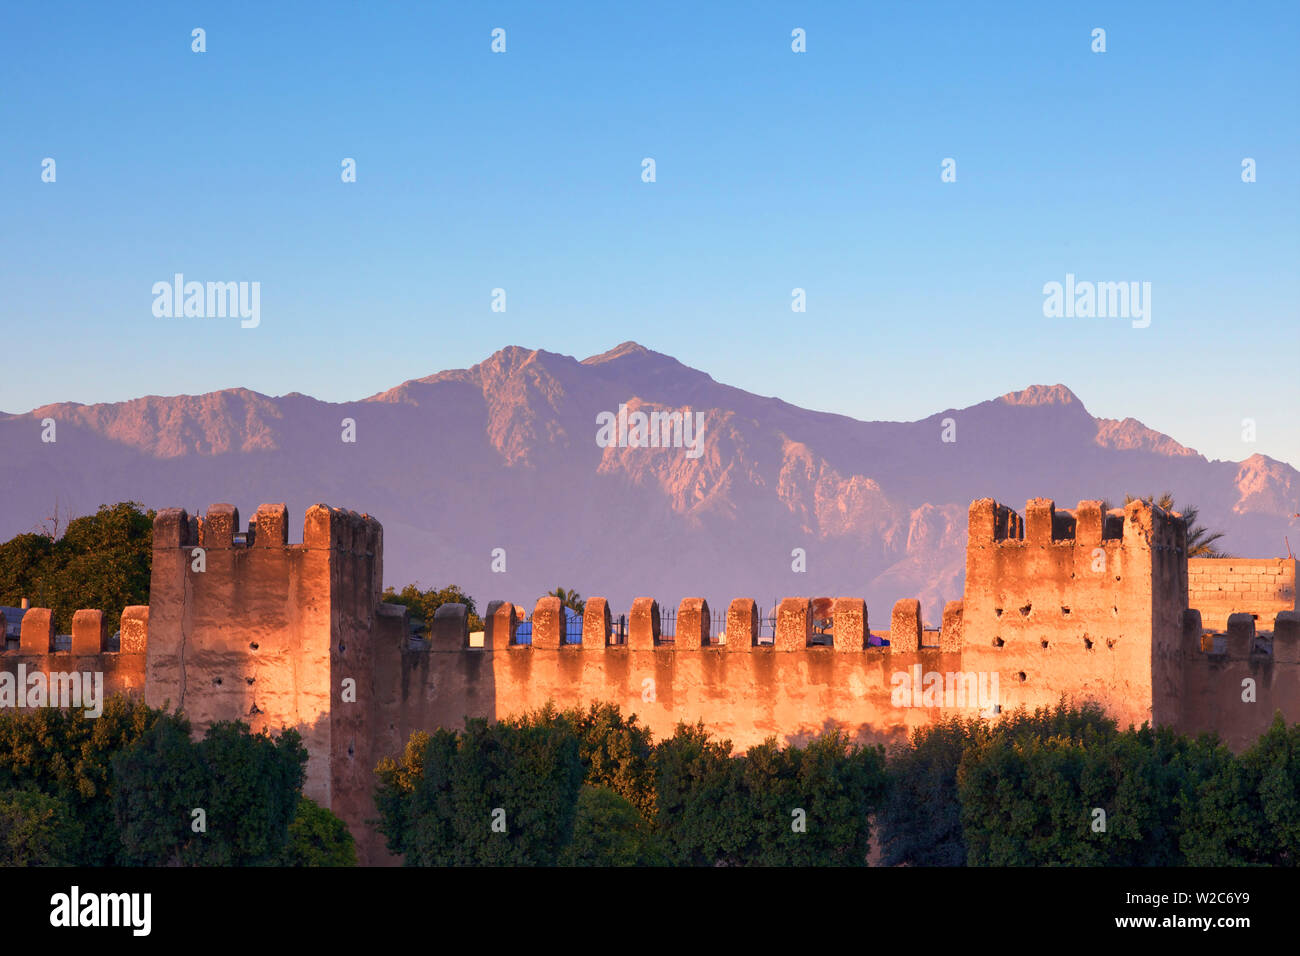 Old City Wall With Anti Atlas Mountain Range In The Background, Taroudant, Morocco, North Africa Stock Photo